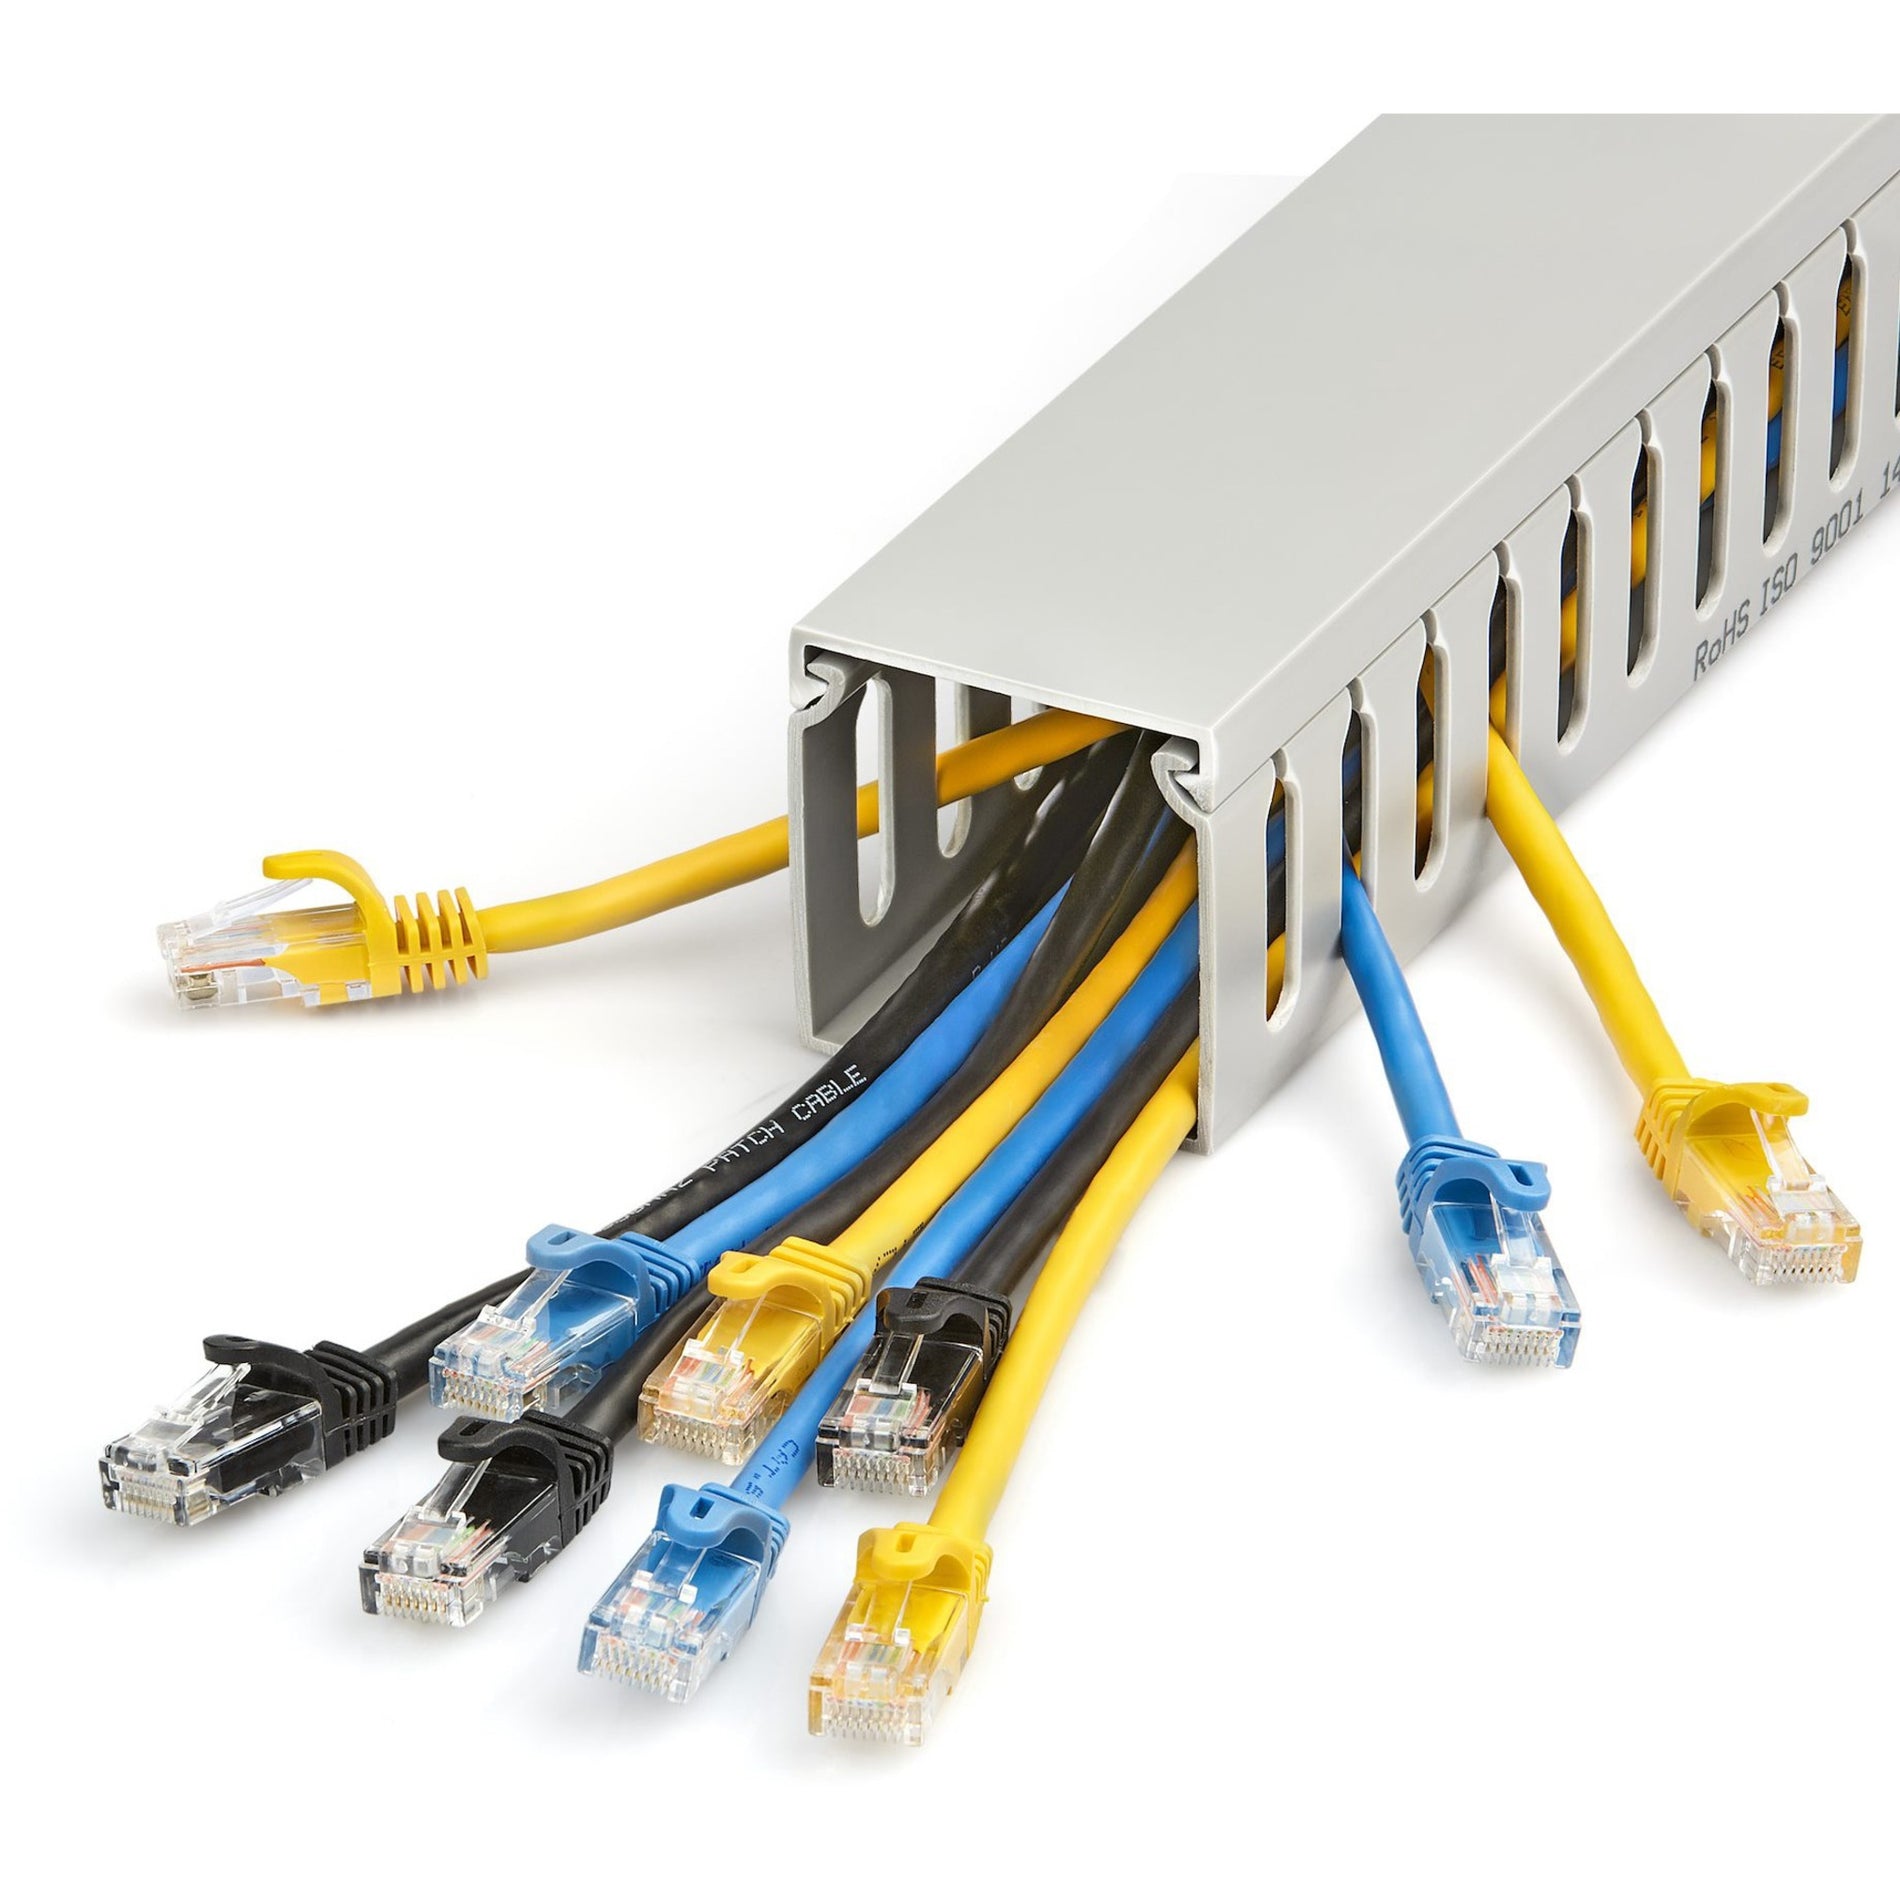 StarTech.com CBMWD5050 Cable Management Raceway, Slotted Wiring Cable Duct, 50 x 50mm, TAA Compliant, 2 Year Warranty